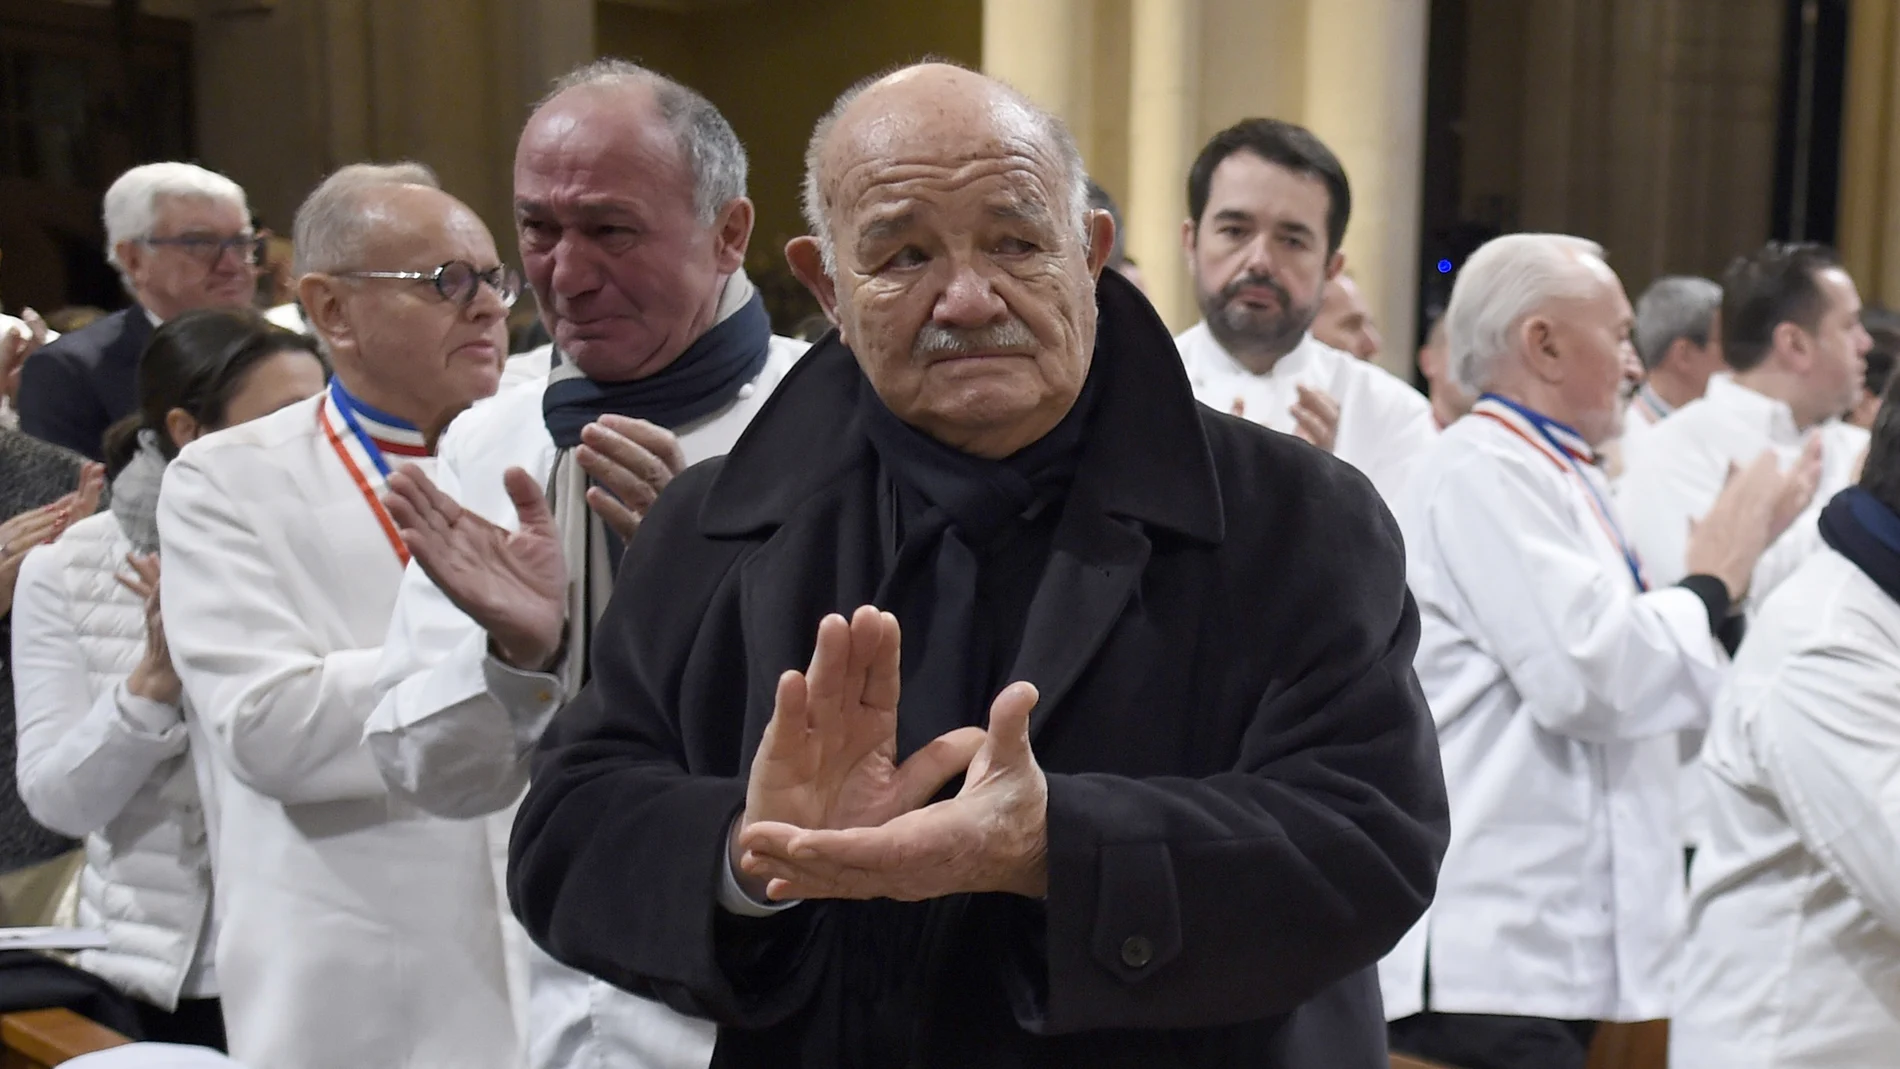 FILE - In this Friday, Jan. 26, 2018 file photo, French chef Pierre Troisgros applauds as the coffin of late French chef Paul Bocuse leaves the Saint-Jean Cathedral, in Lyon, central France. French media say Pierre Troisgros, one of Franceâ€™s top chefs who helped reinvent the countryâ€™s traditional cuisine, has died. He was 92. The French press quoted the head of the Maison Troisgros, Patrice Laurent, saying the chef died Wednesday, Sept. 23, 2020 at his home in Coteau, near Roanne in the Loire region where his restaurant is located. (Philippe Desmazes/Pool Photo via AP, file)